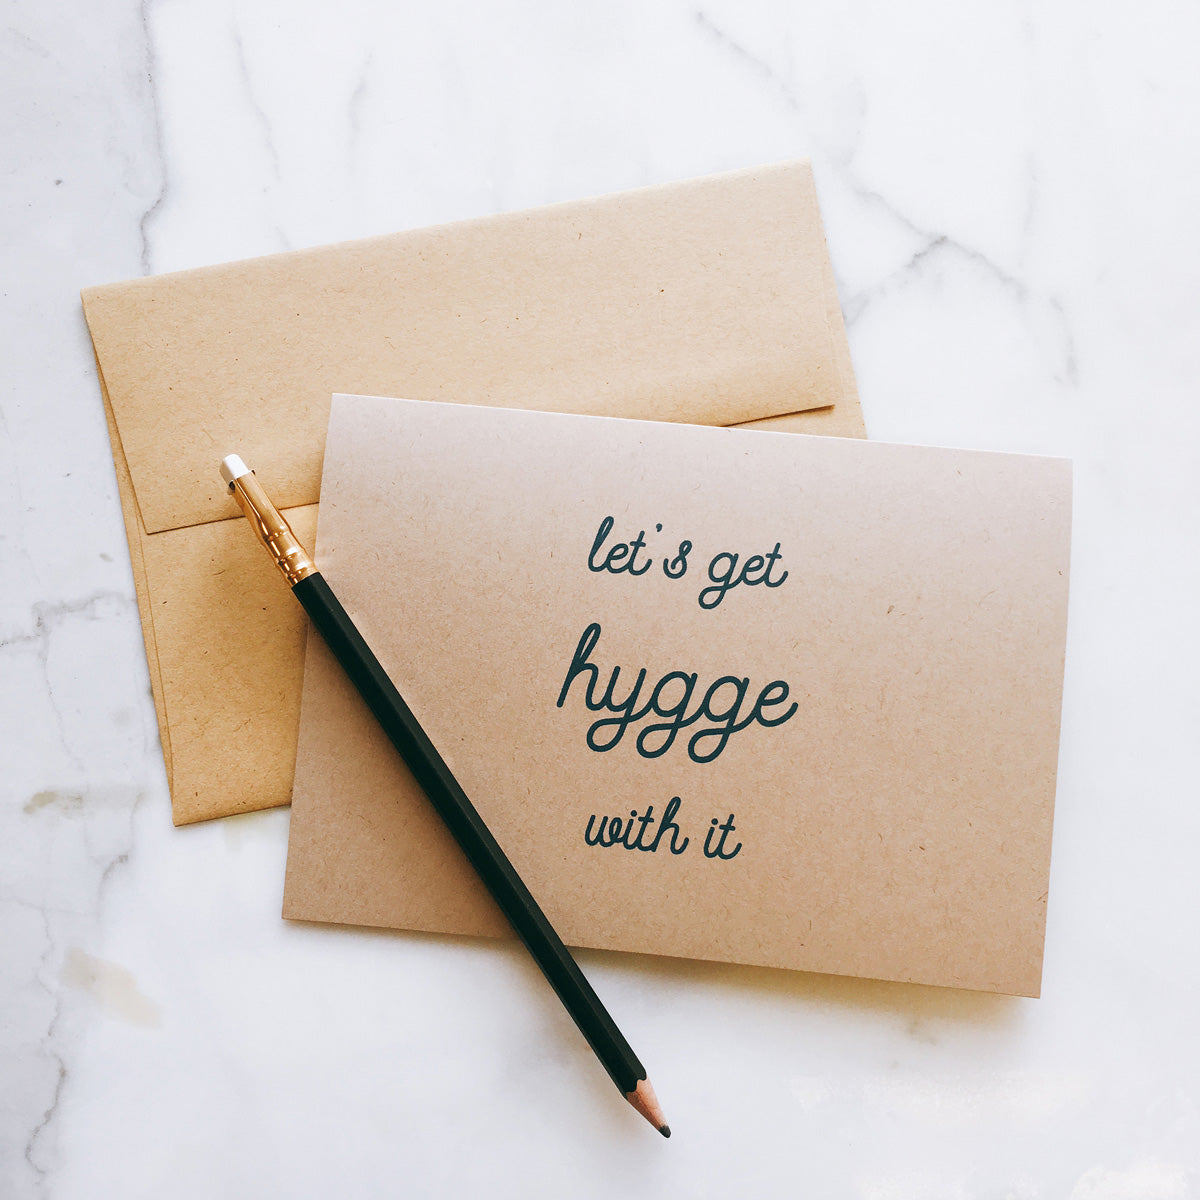 Let's get hygge with it - Greeting Card